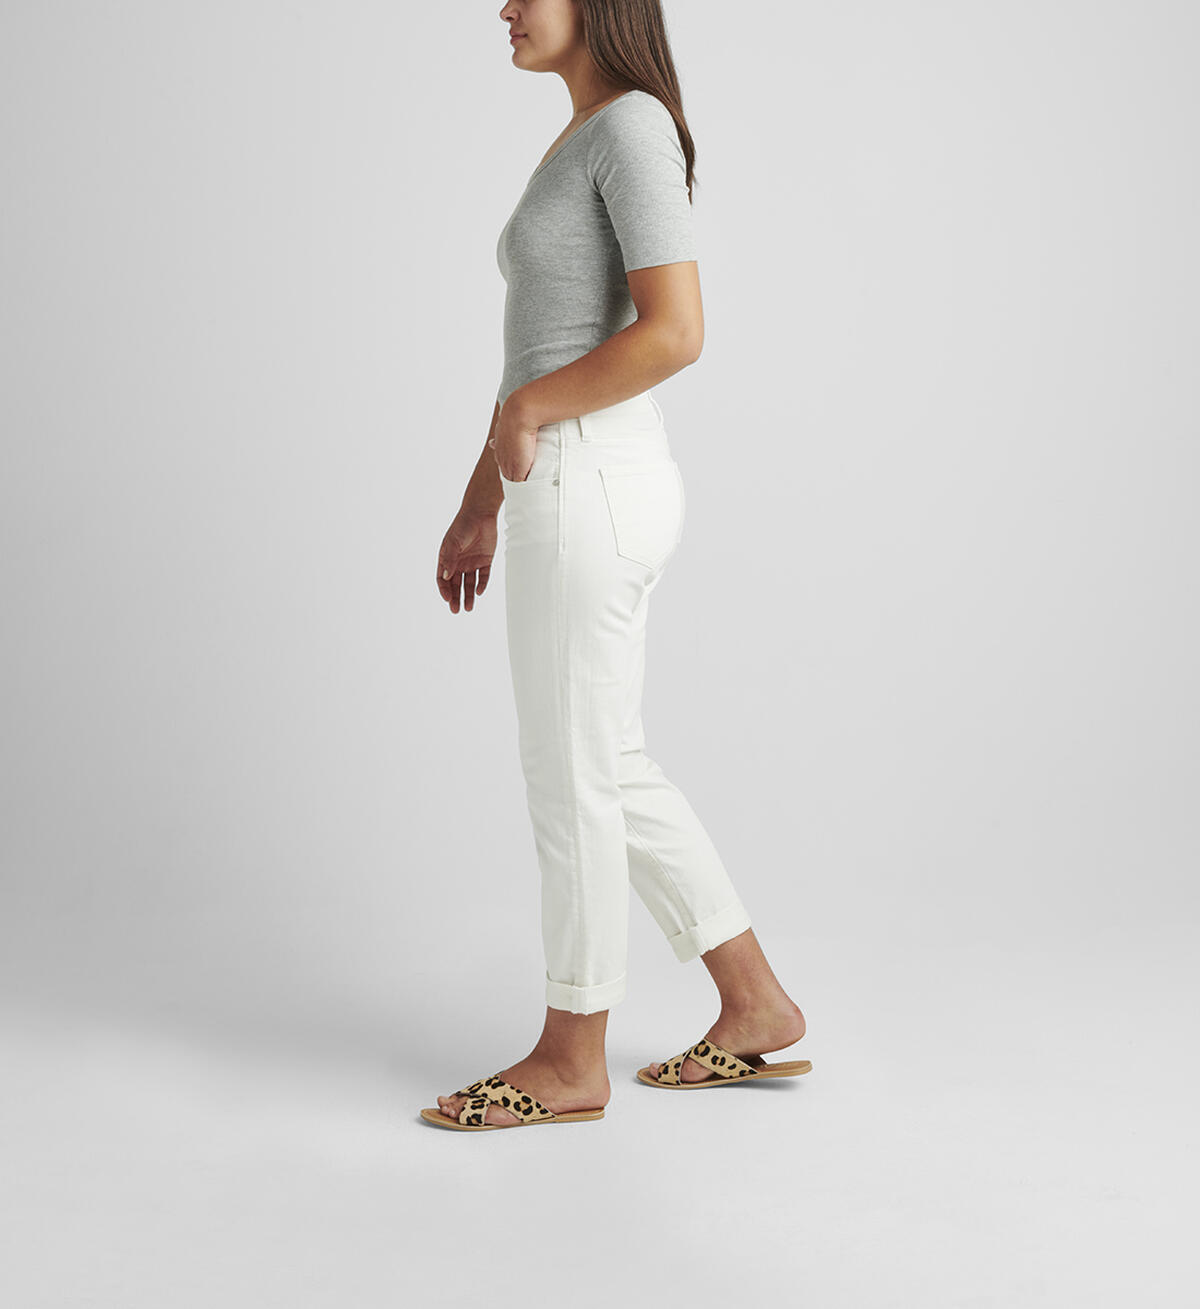 Carter Mid Rise Girlfriend Jeans, White, hi-res image number 2